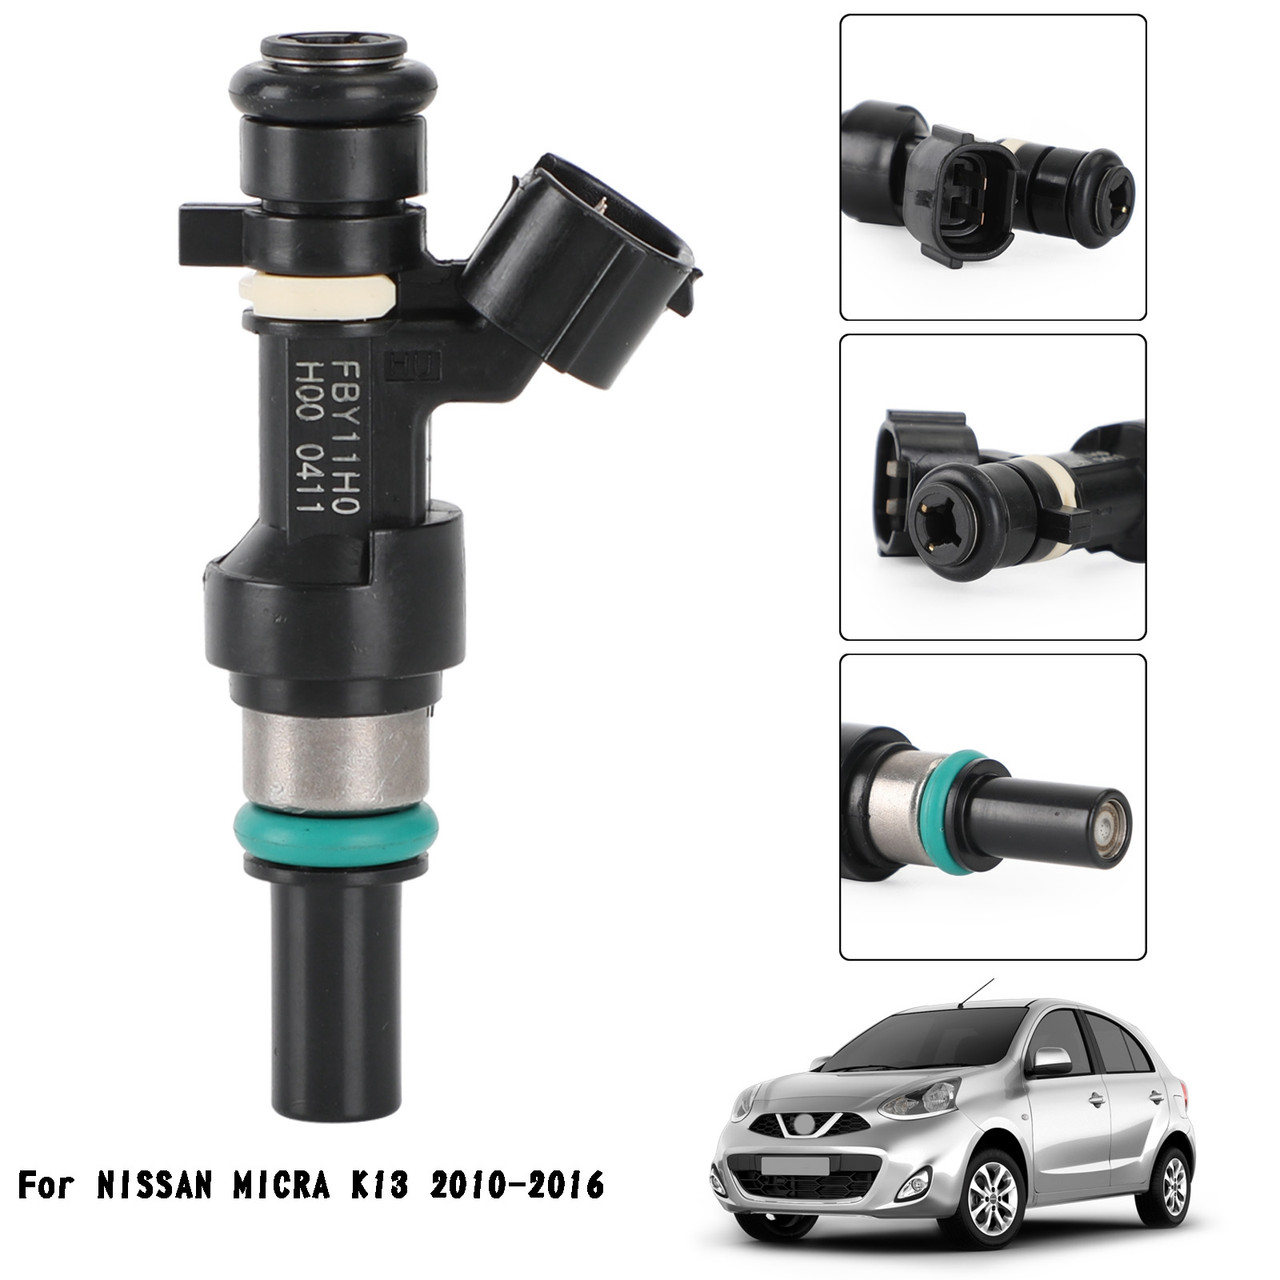 Fuel Injectors FBY11H0 FBY1010 Fit For NISSAN MICRA K13 2010-2016 BLK